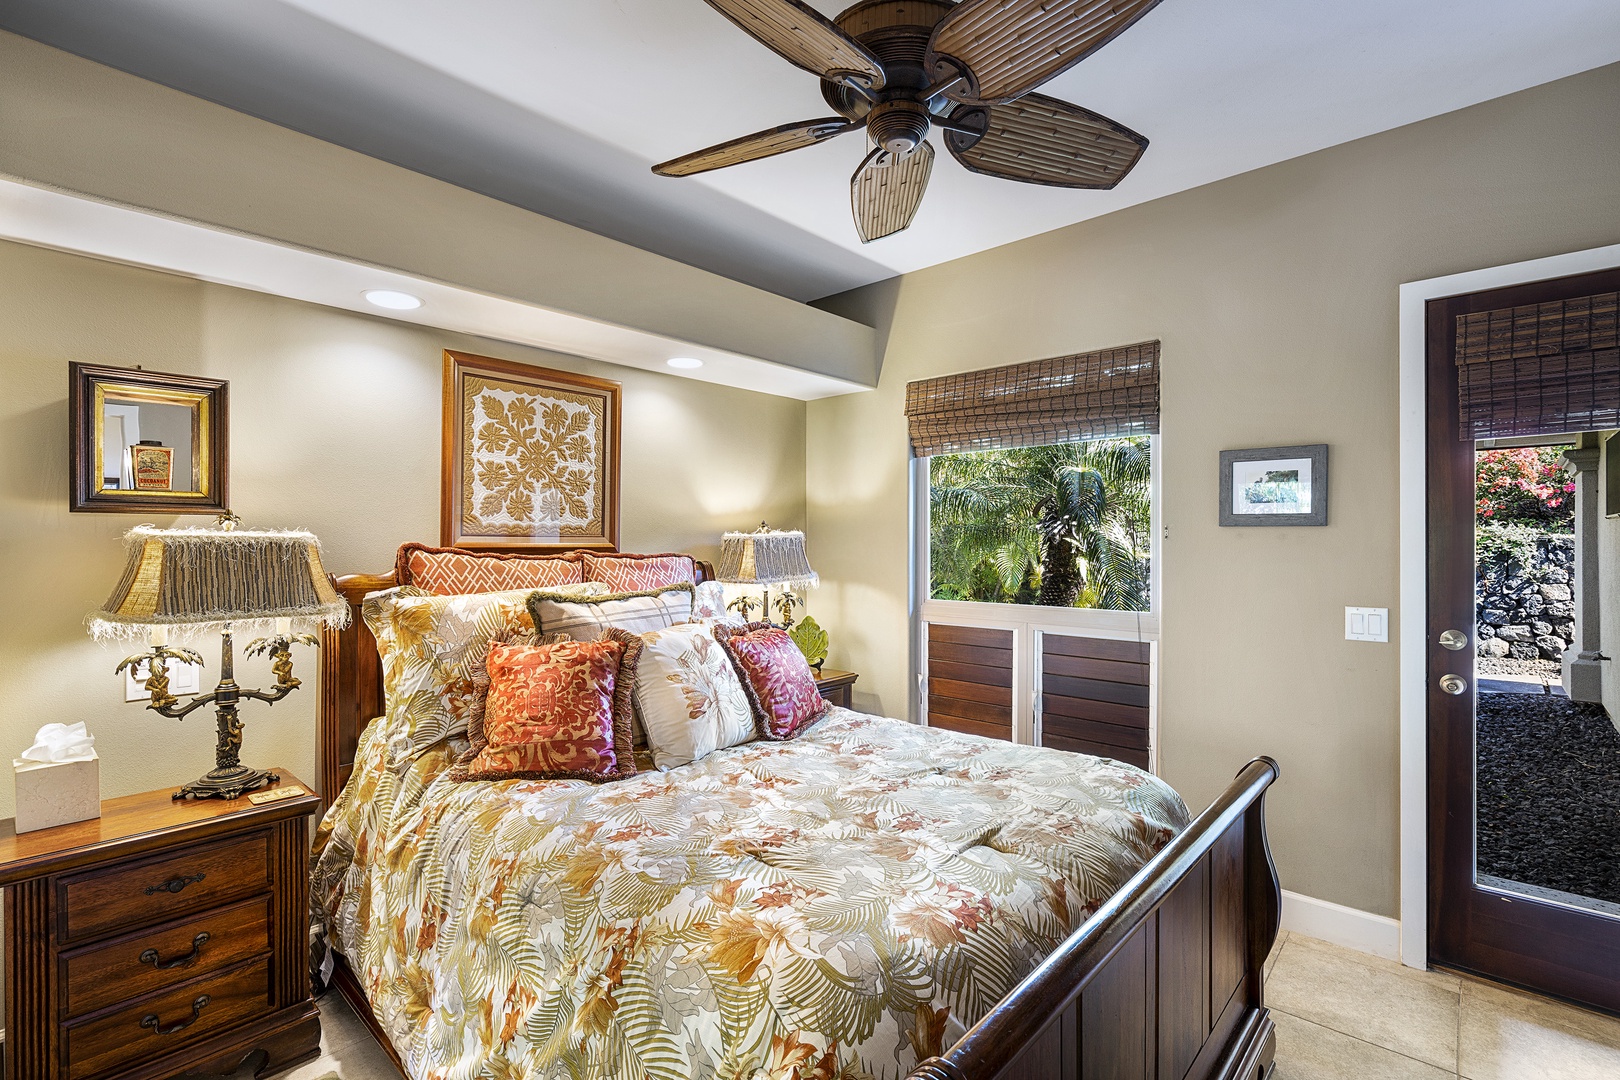 Kailua Kona Vacation Rentals, Hale Aikane - Guest bedroom with exterior access and Queen bed